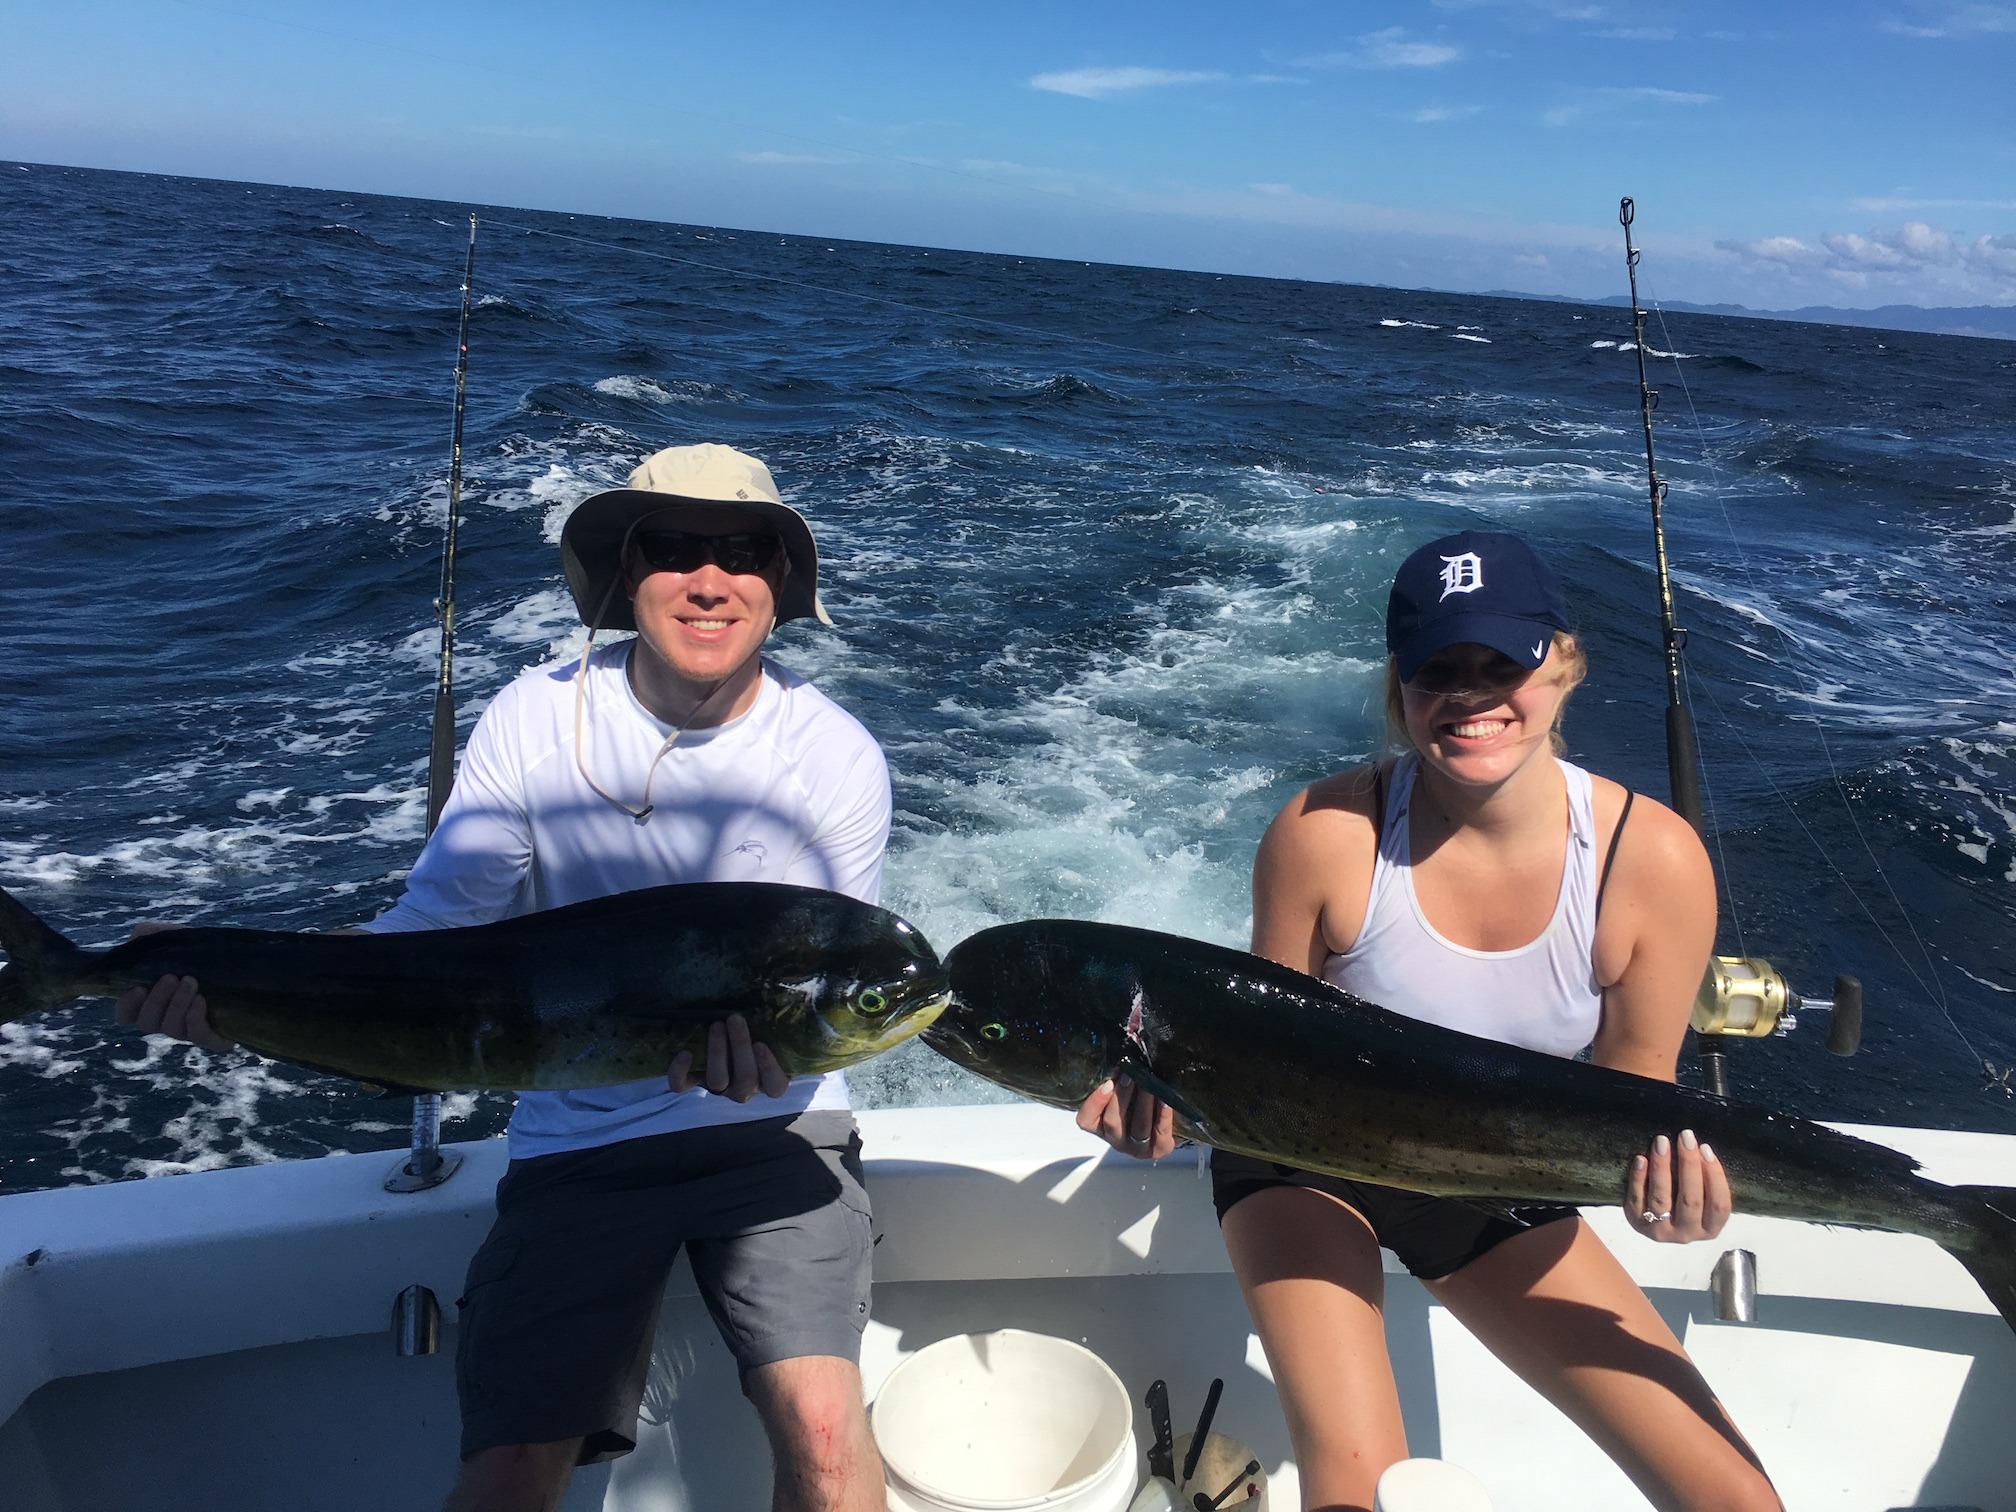 Just two of the MahiMahi caught by Alexis and Philp with Costa Rica Fishing Charters